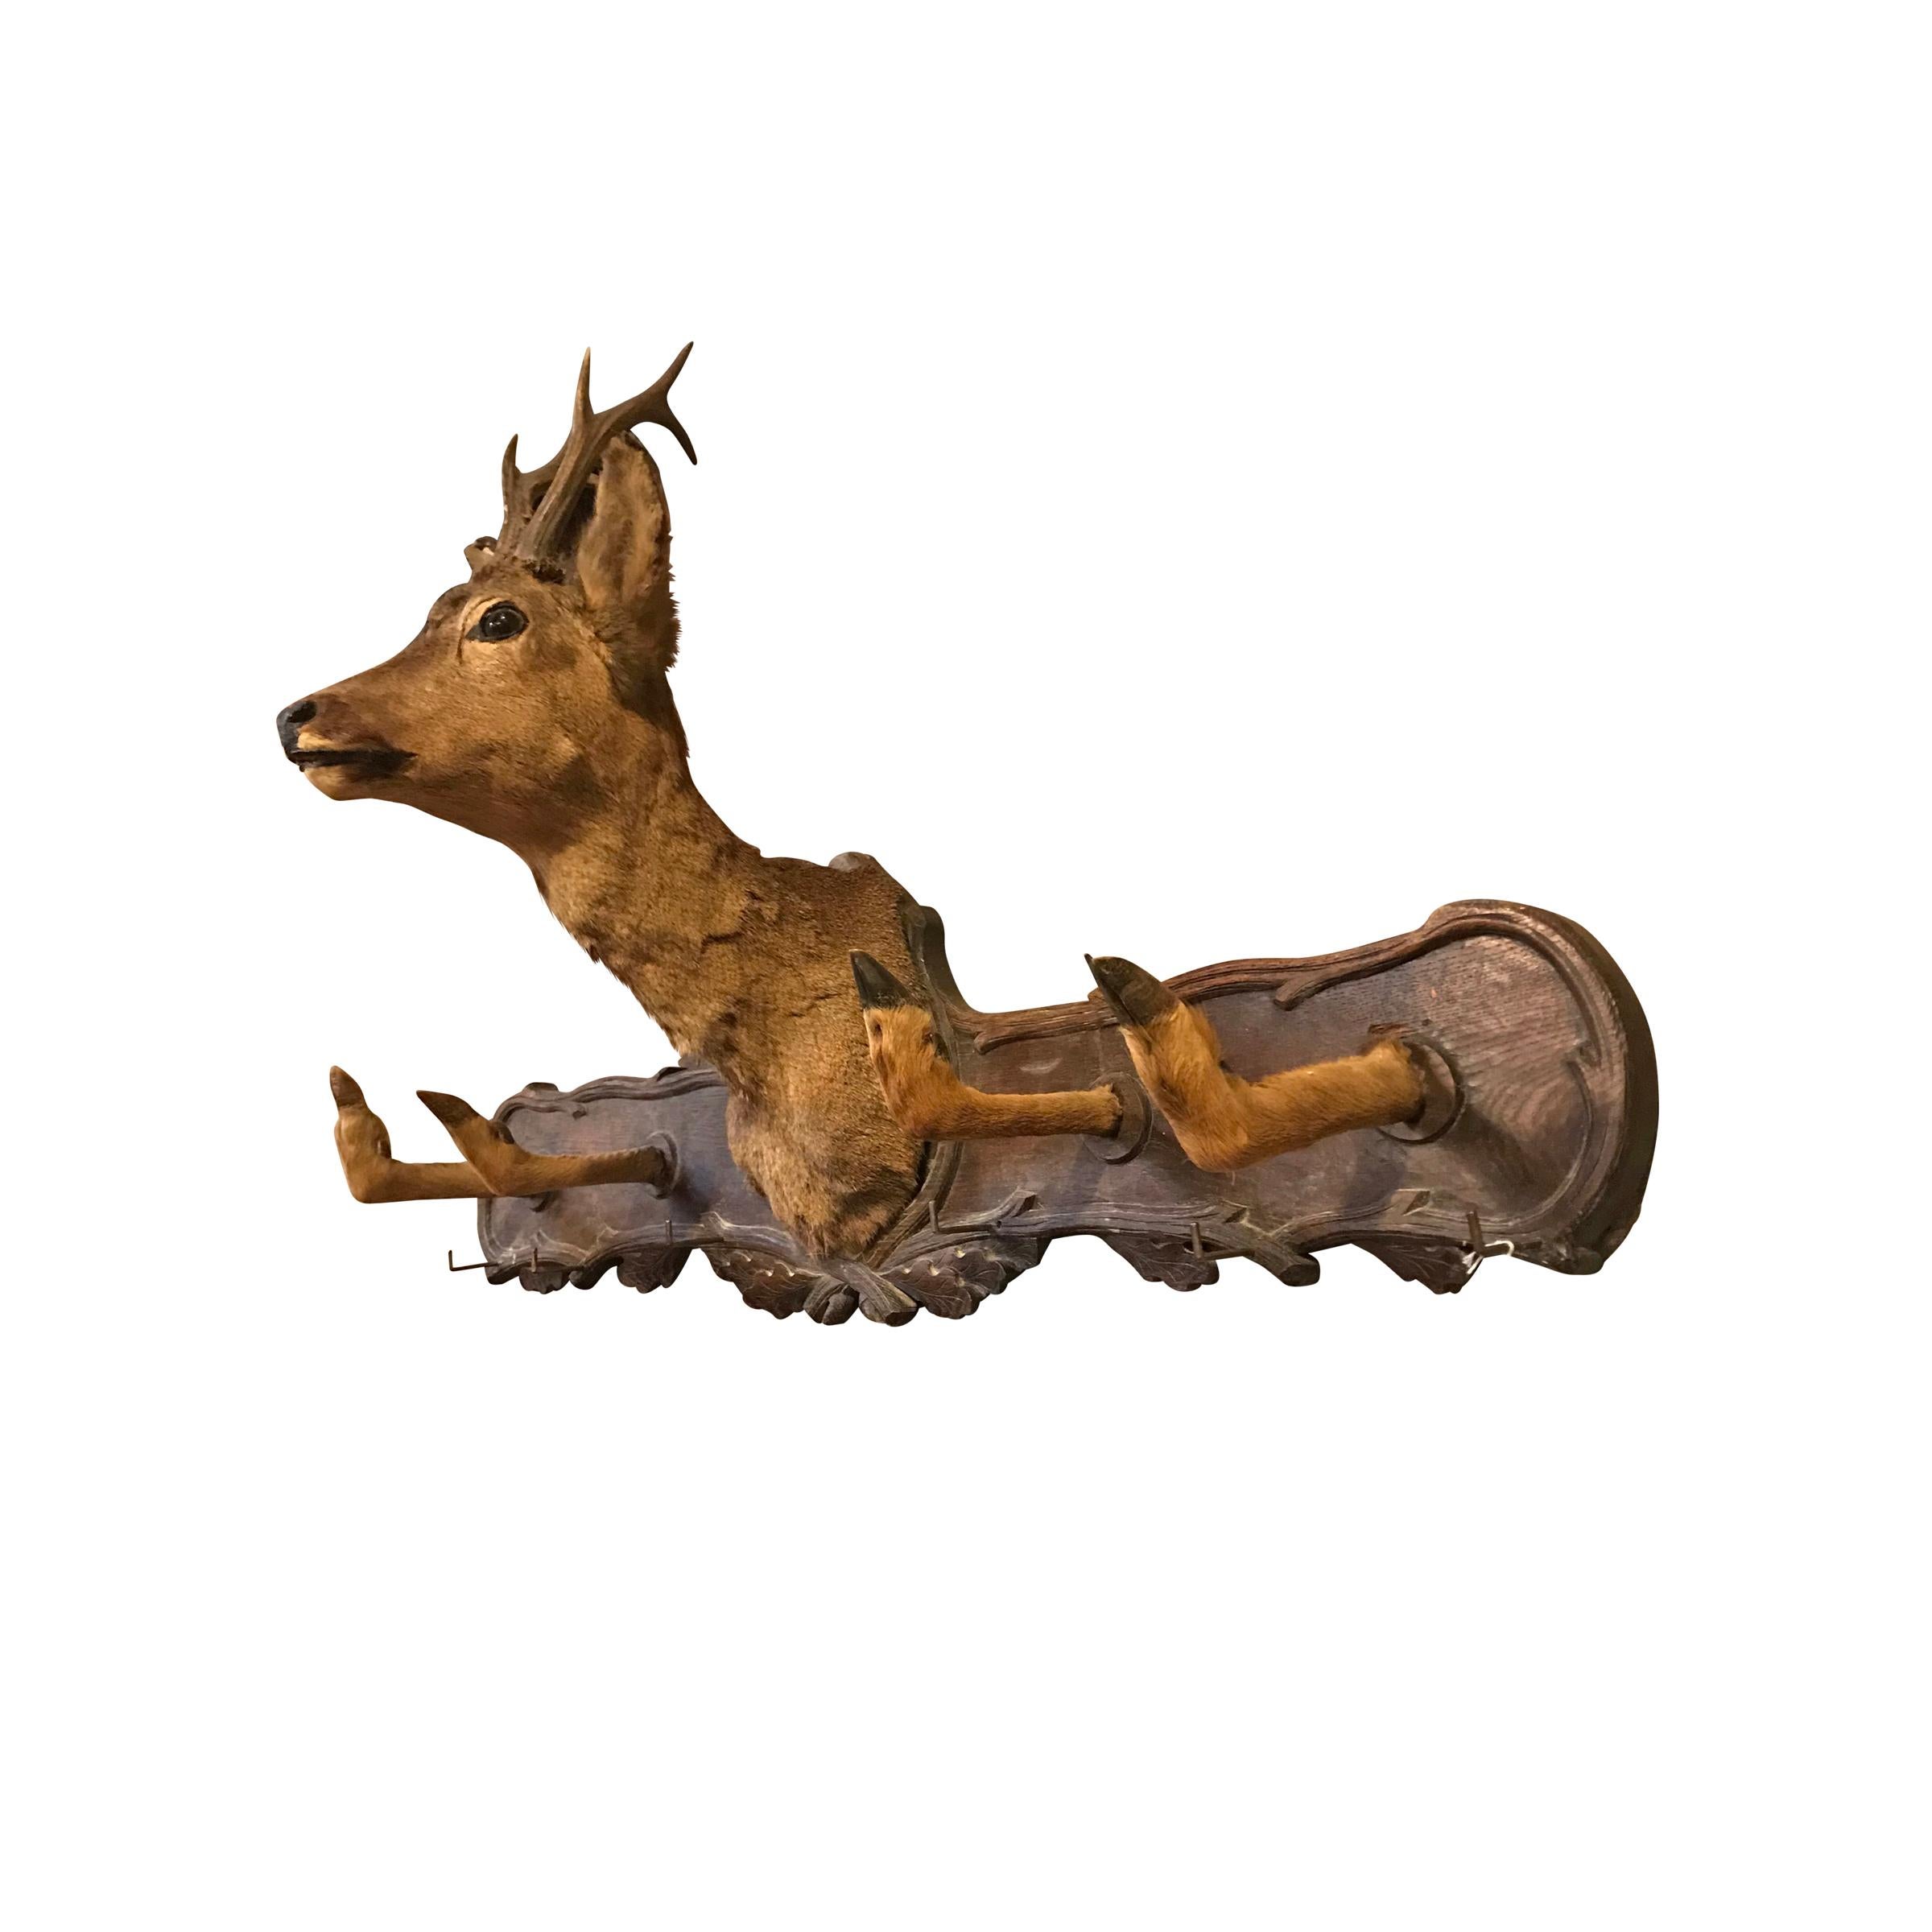 A whimsical 19th century German black forest deer hat or coat rack with a small roe deer mount with four roe deer legs as hooks, mounted to a carved walnut back with oak leaves, and additional small metal hooks.